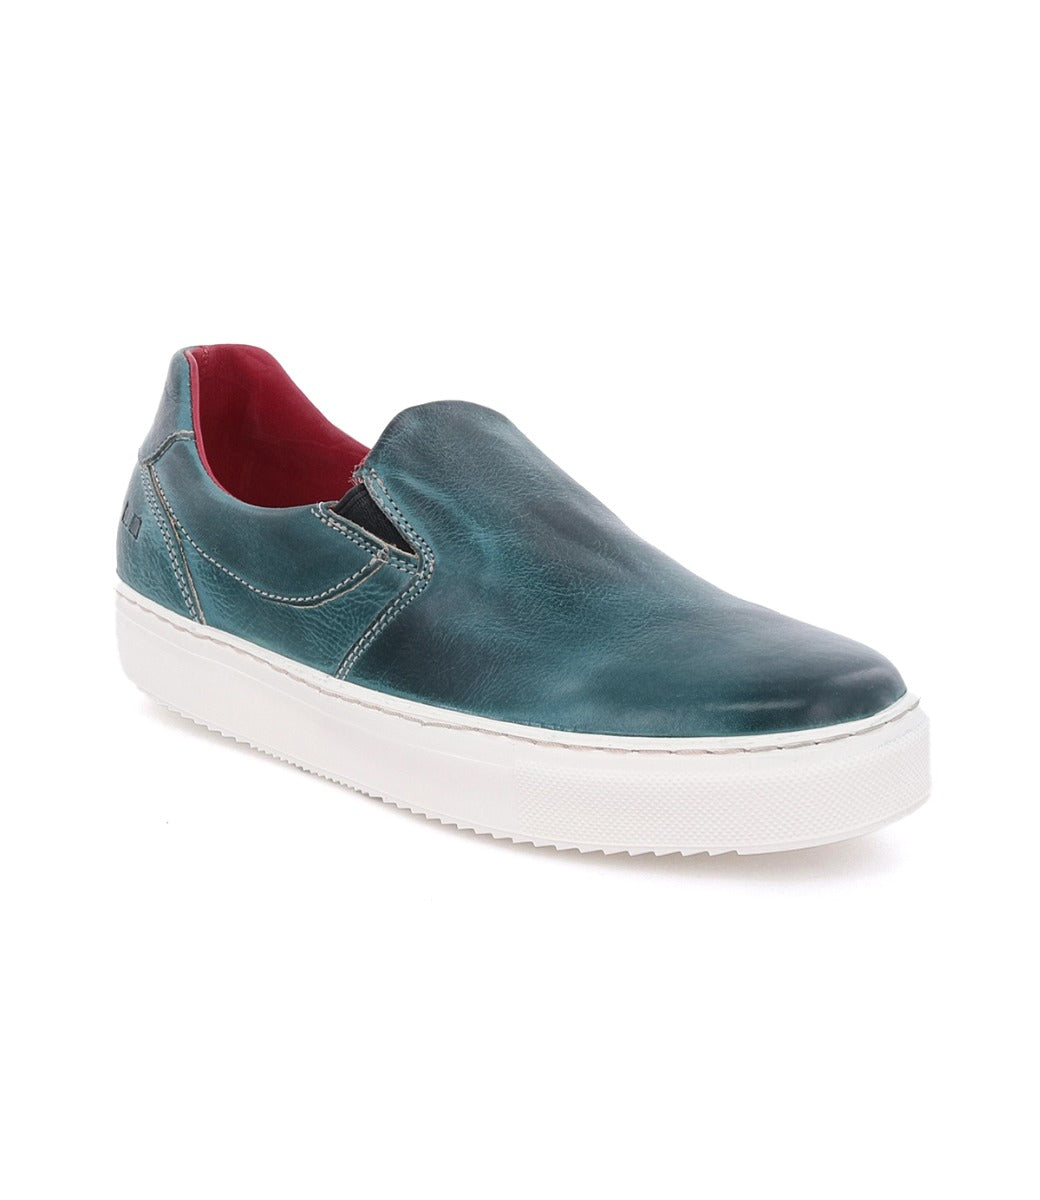 Women's blue leather slip on sneakers named Hermione by the brand Bed Stu.